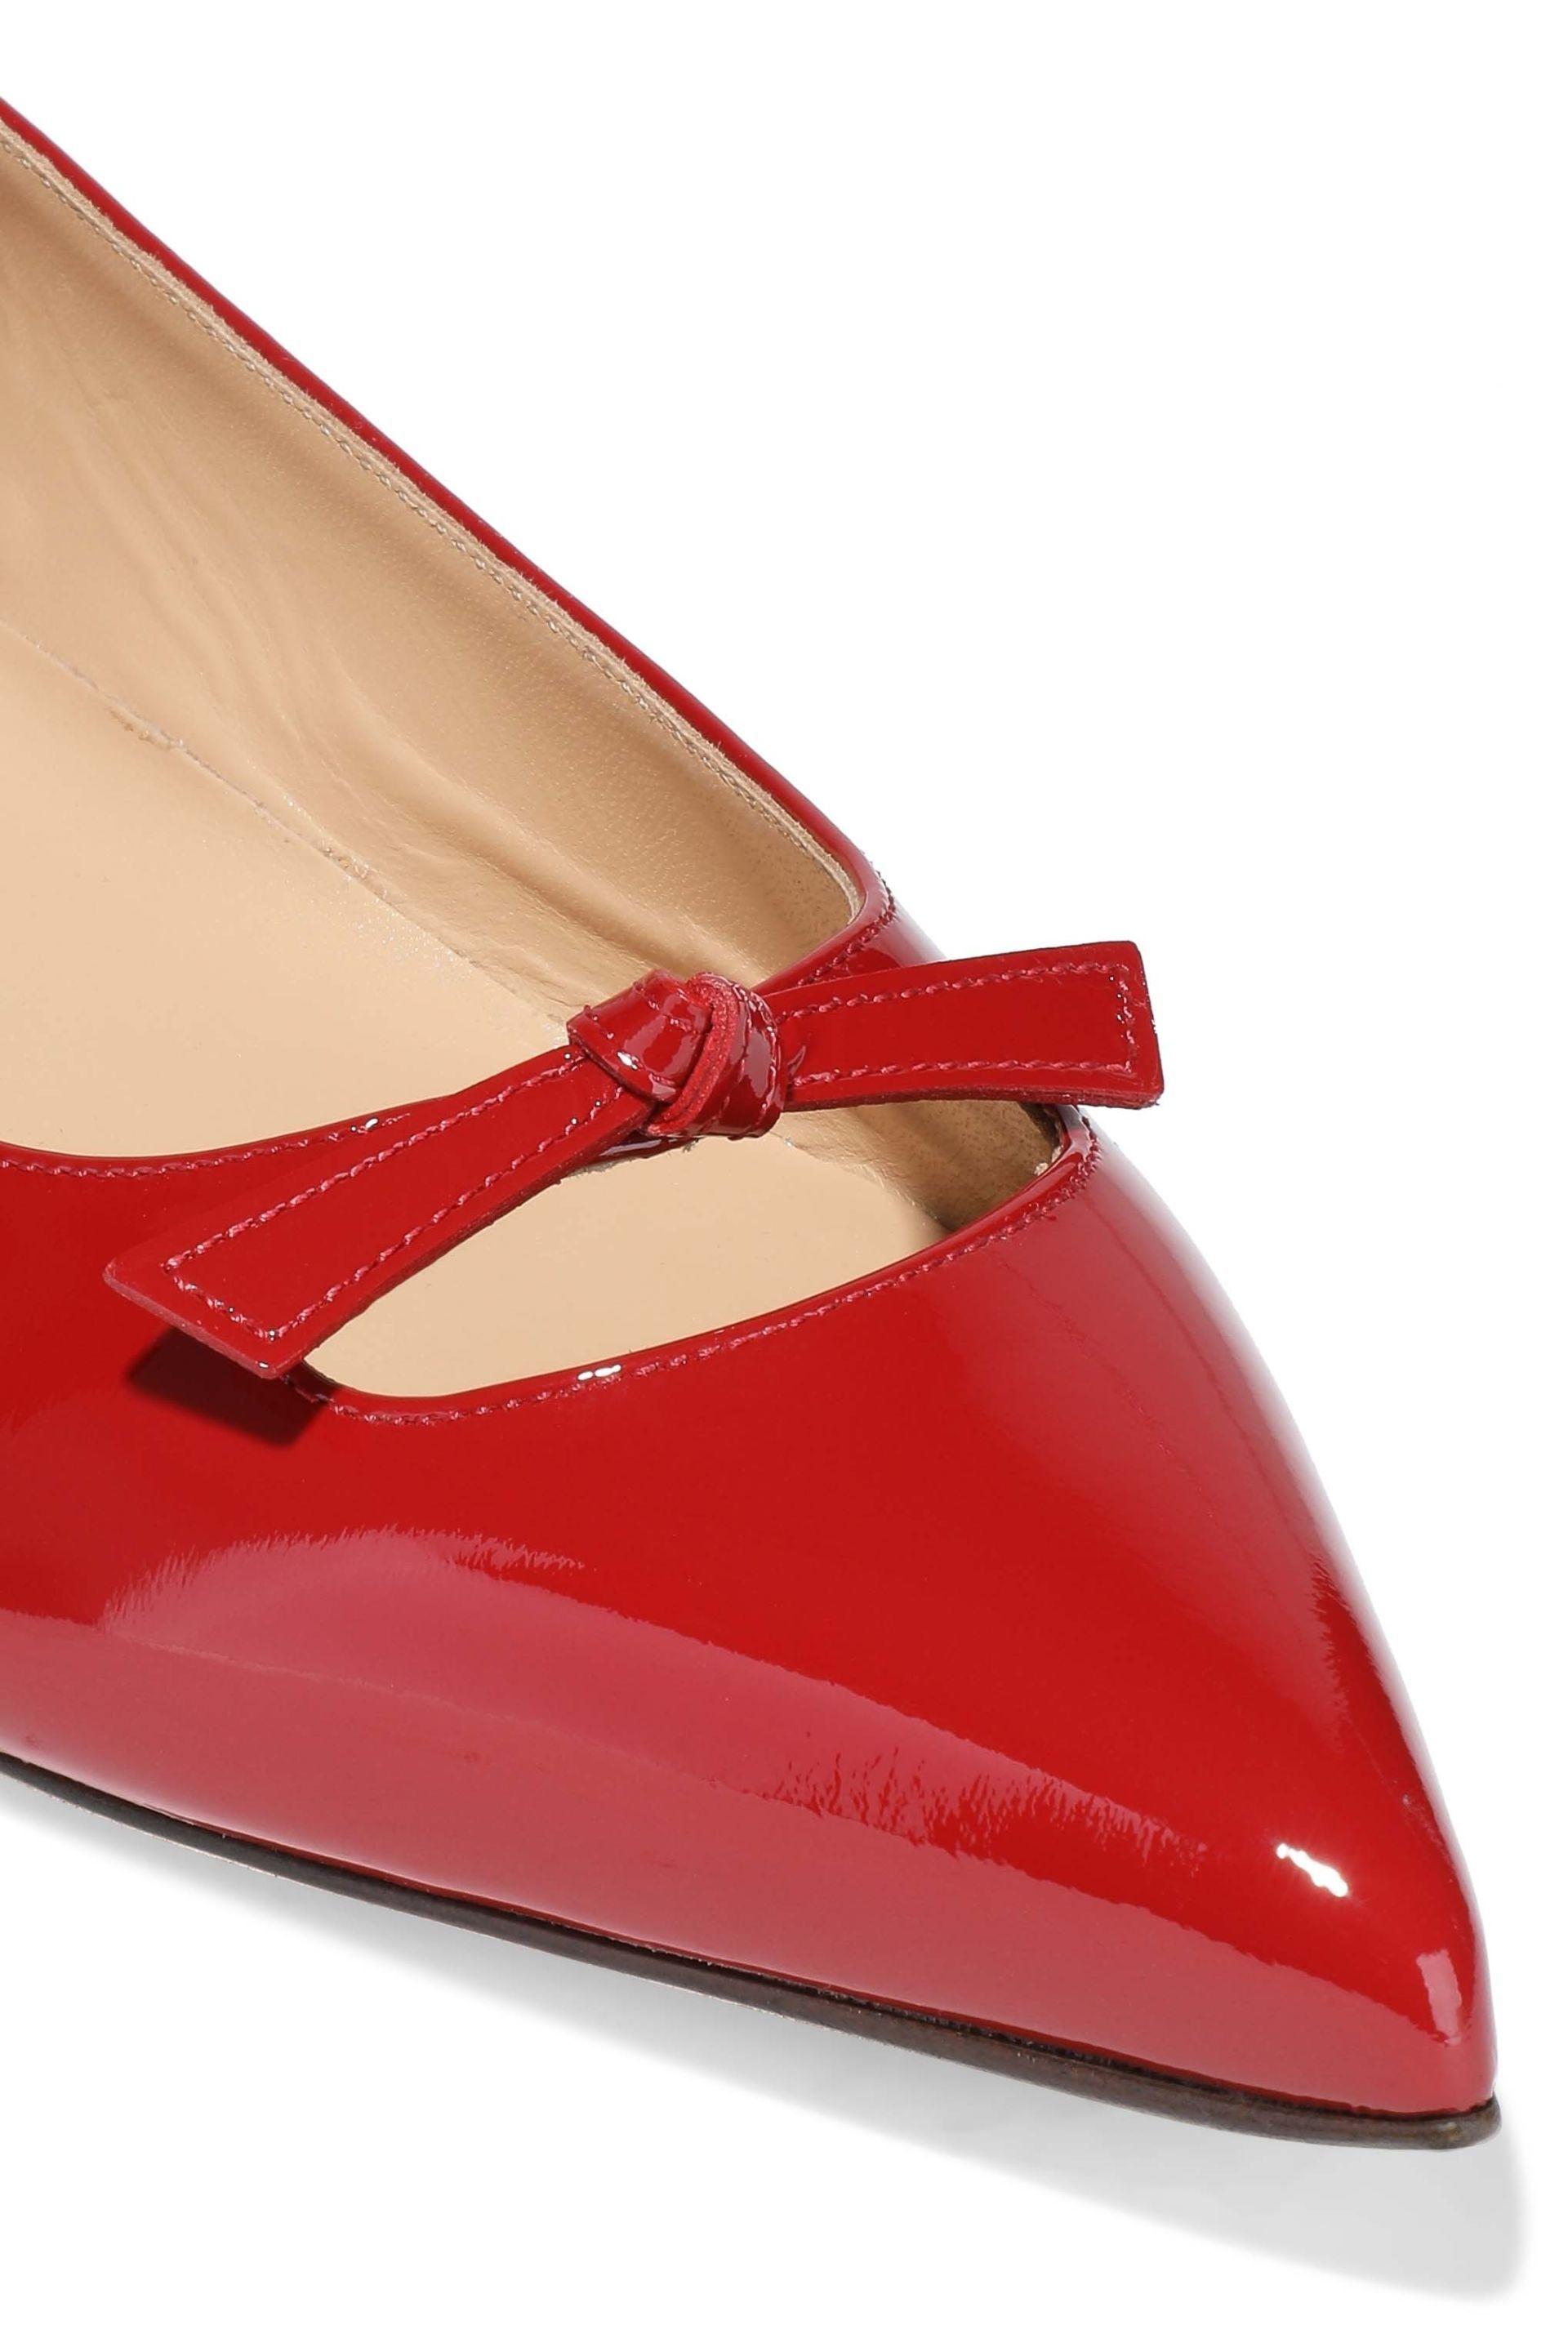 Sergio Rossi Knotted Cutout Patent-leather Point-toe Flats Red - Lyst